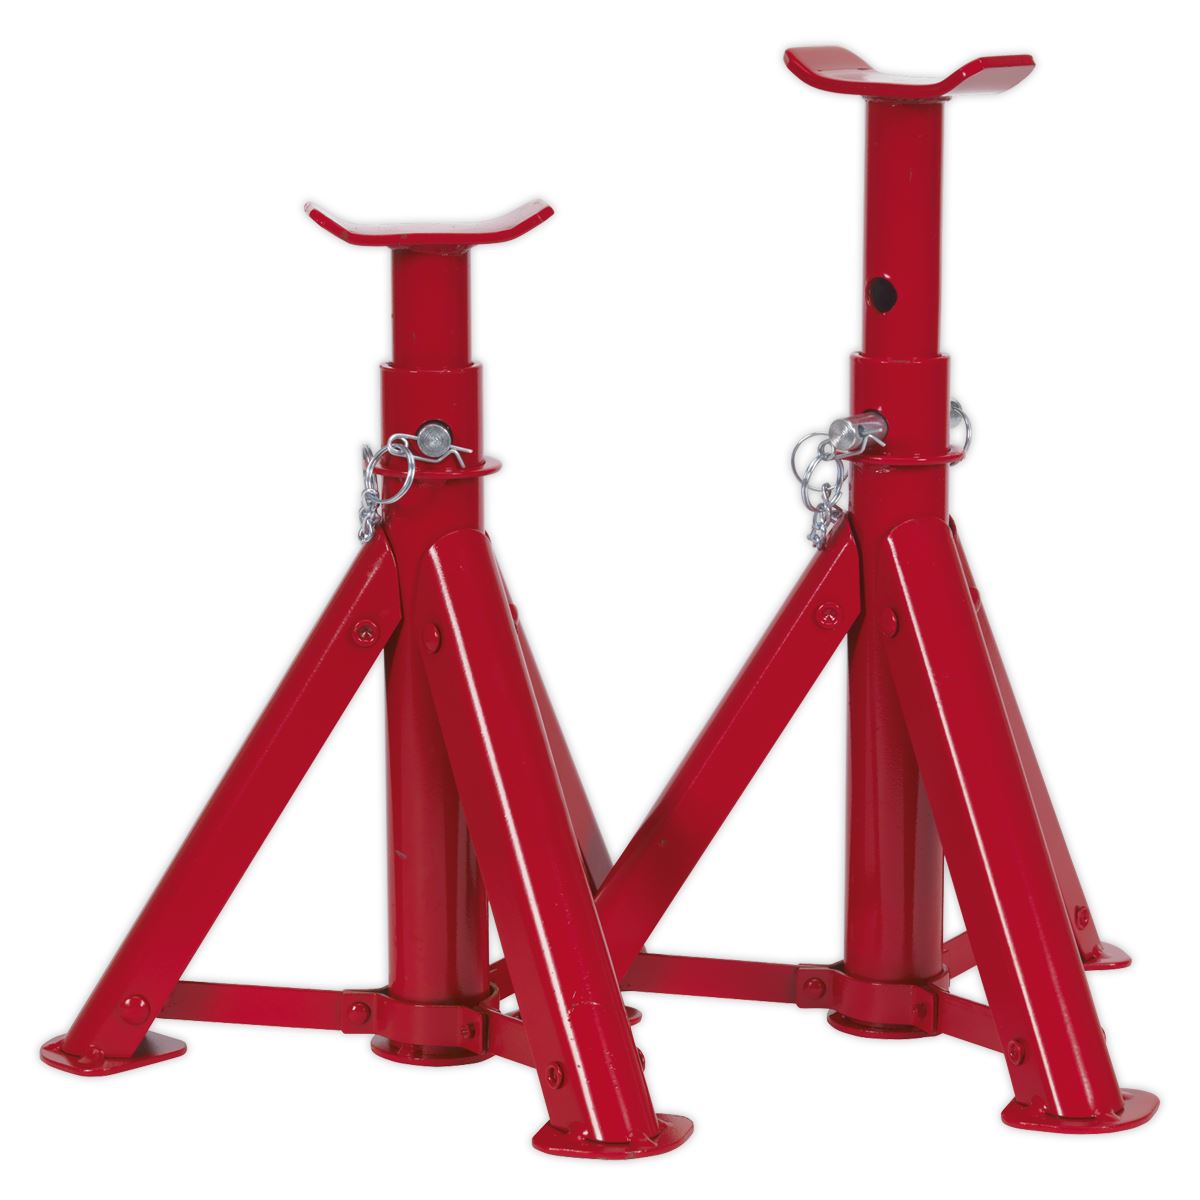 Sealey Axle Stands (Pair) 2 Tonne Capacity per Stand - Folding Type